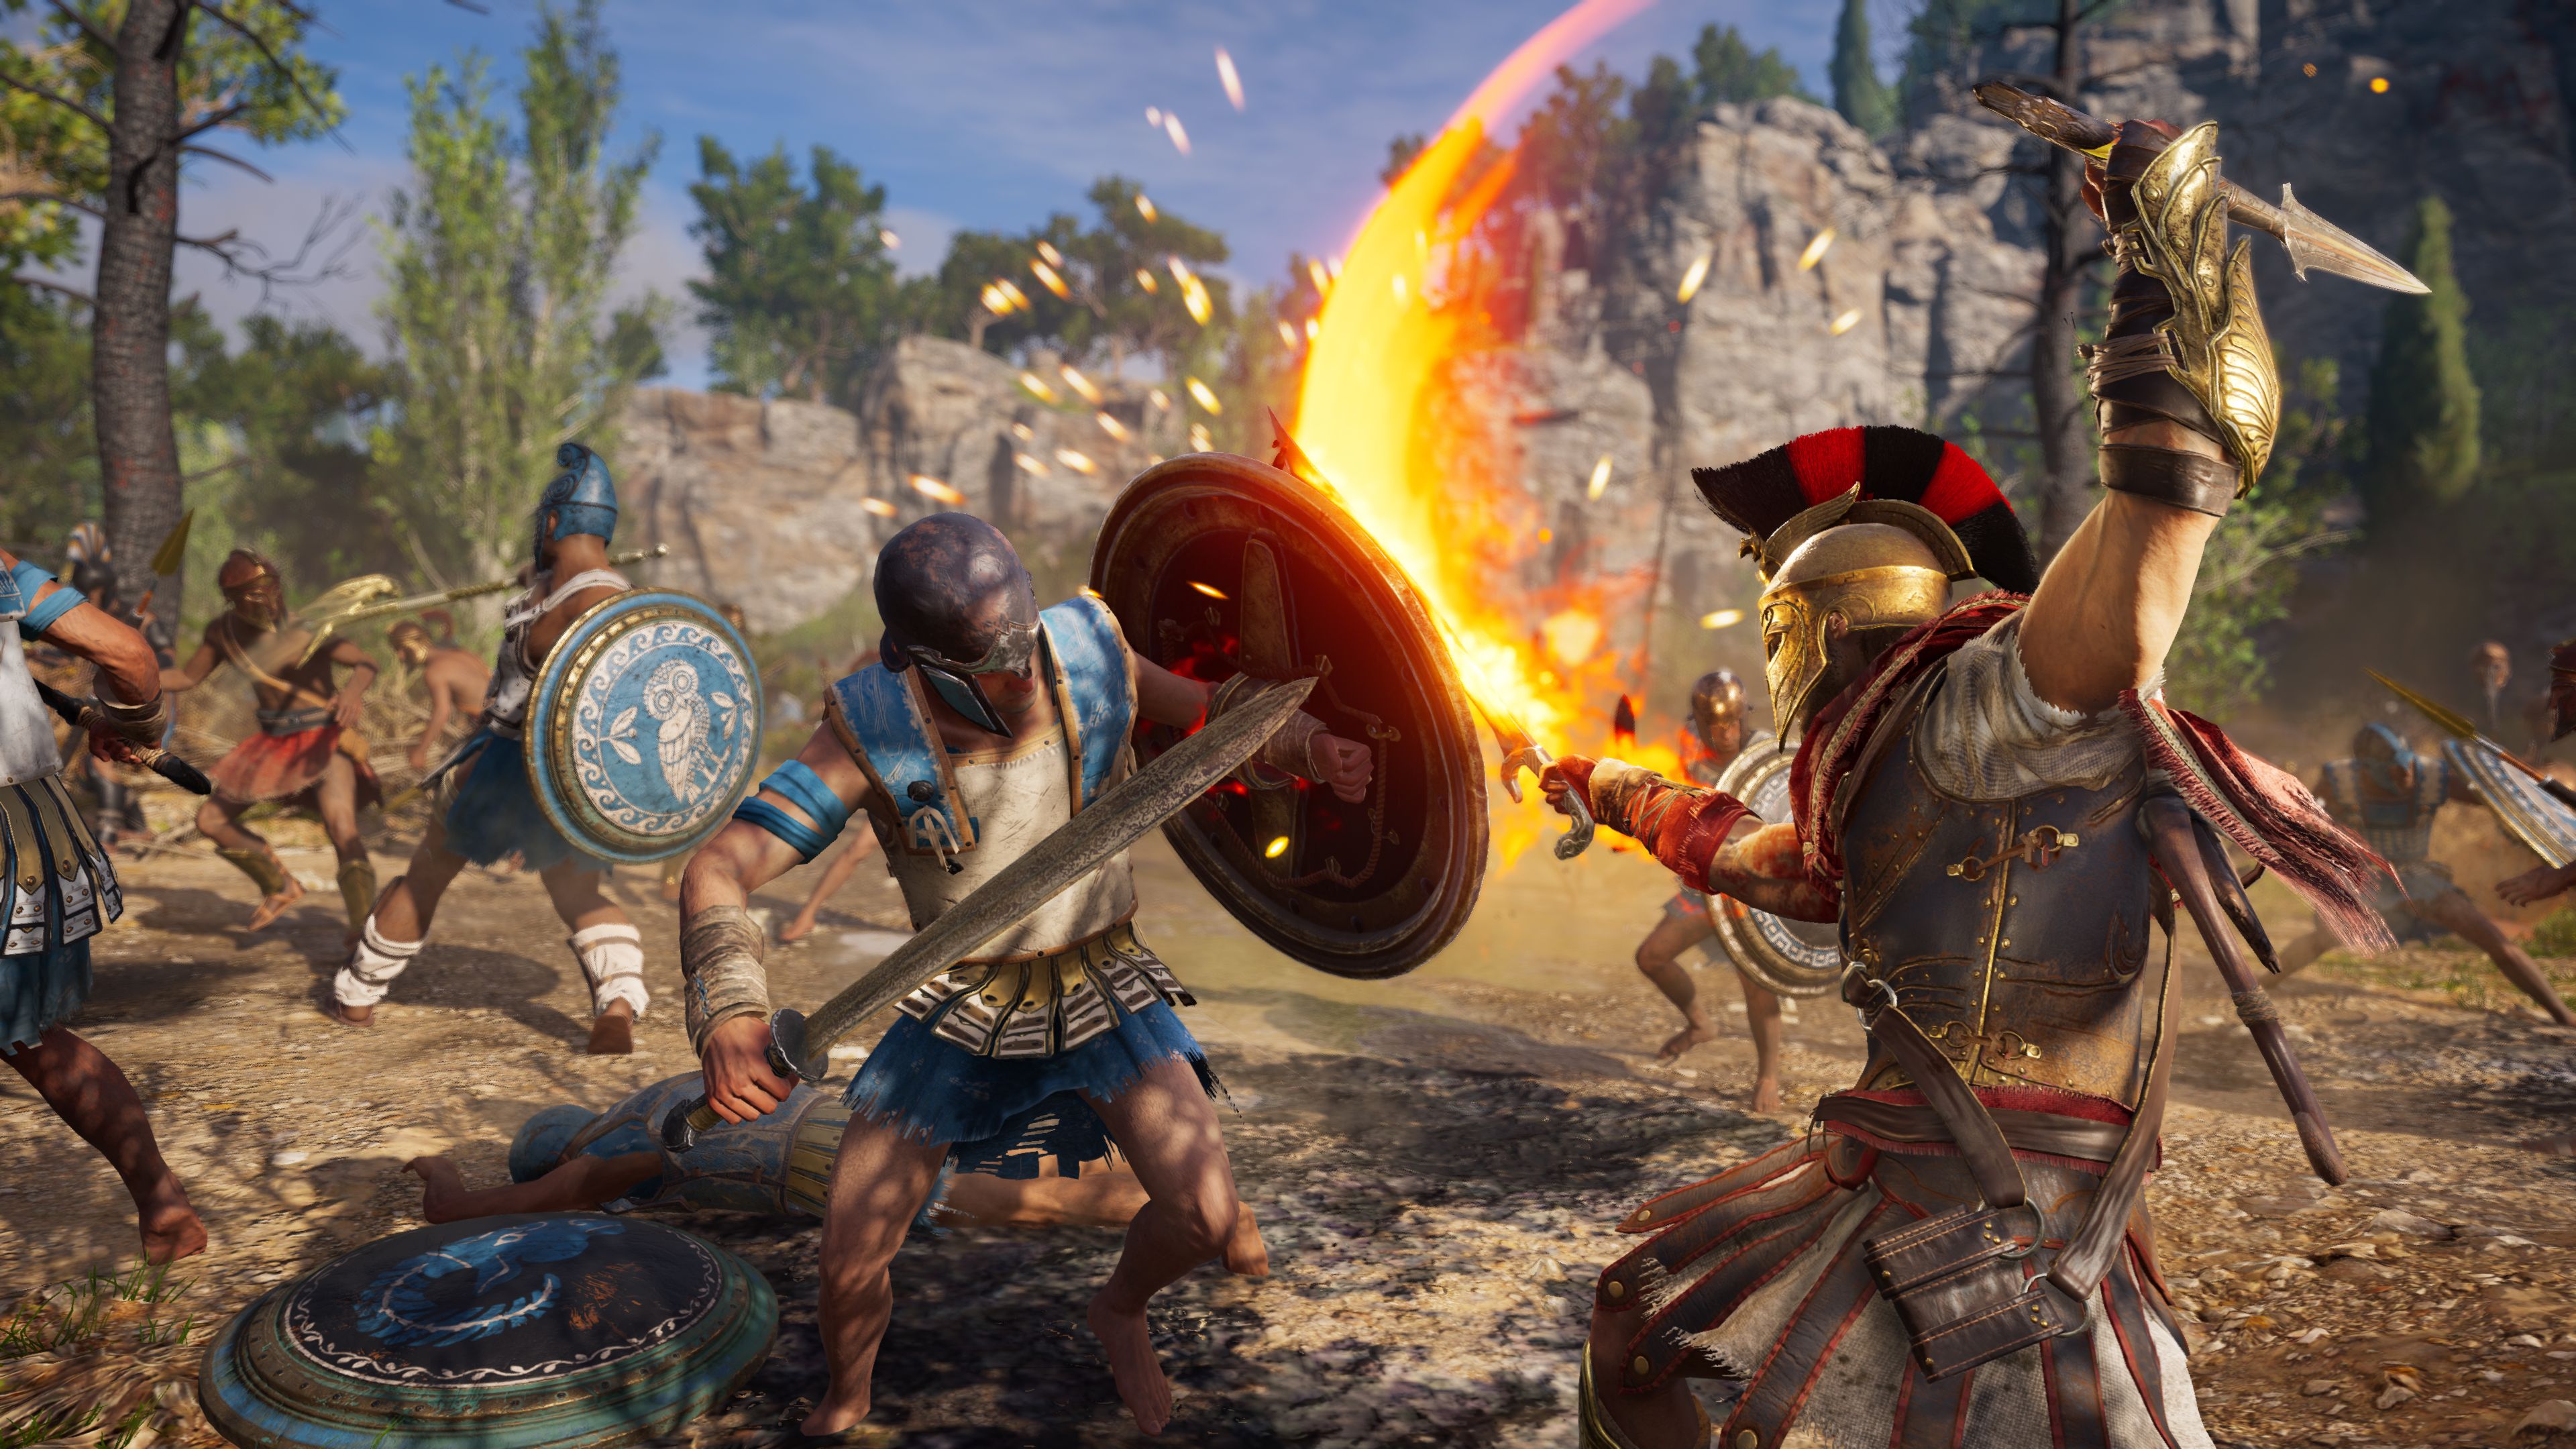 Learn From The Pros 25 Awesome Things Players Can Do In Assassin’s Creed Odyssey